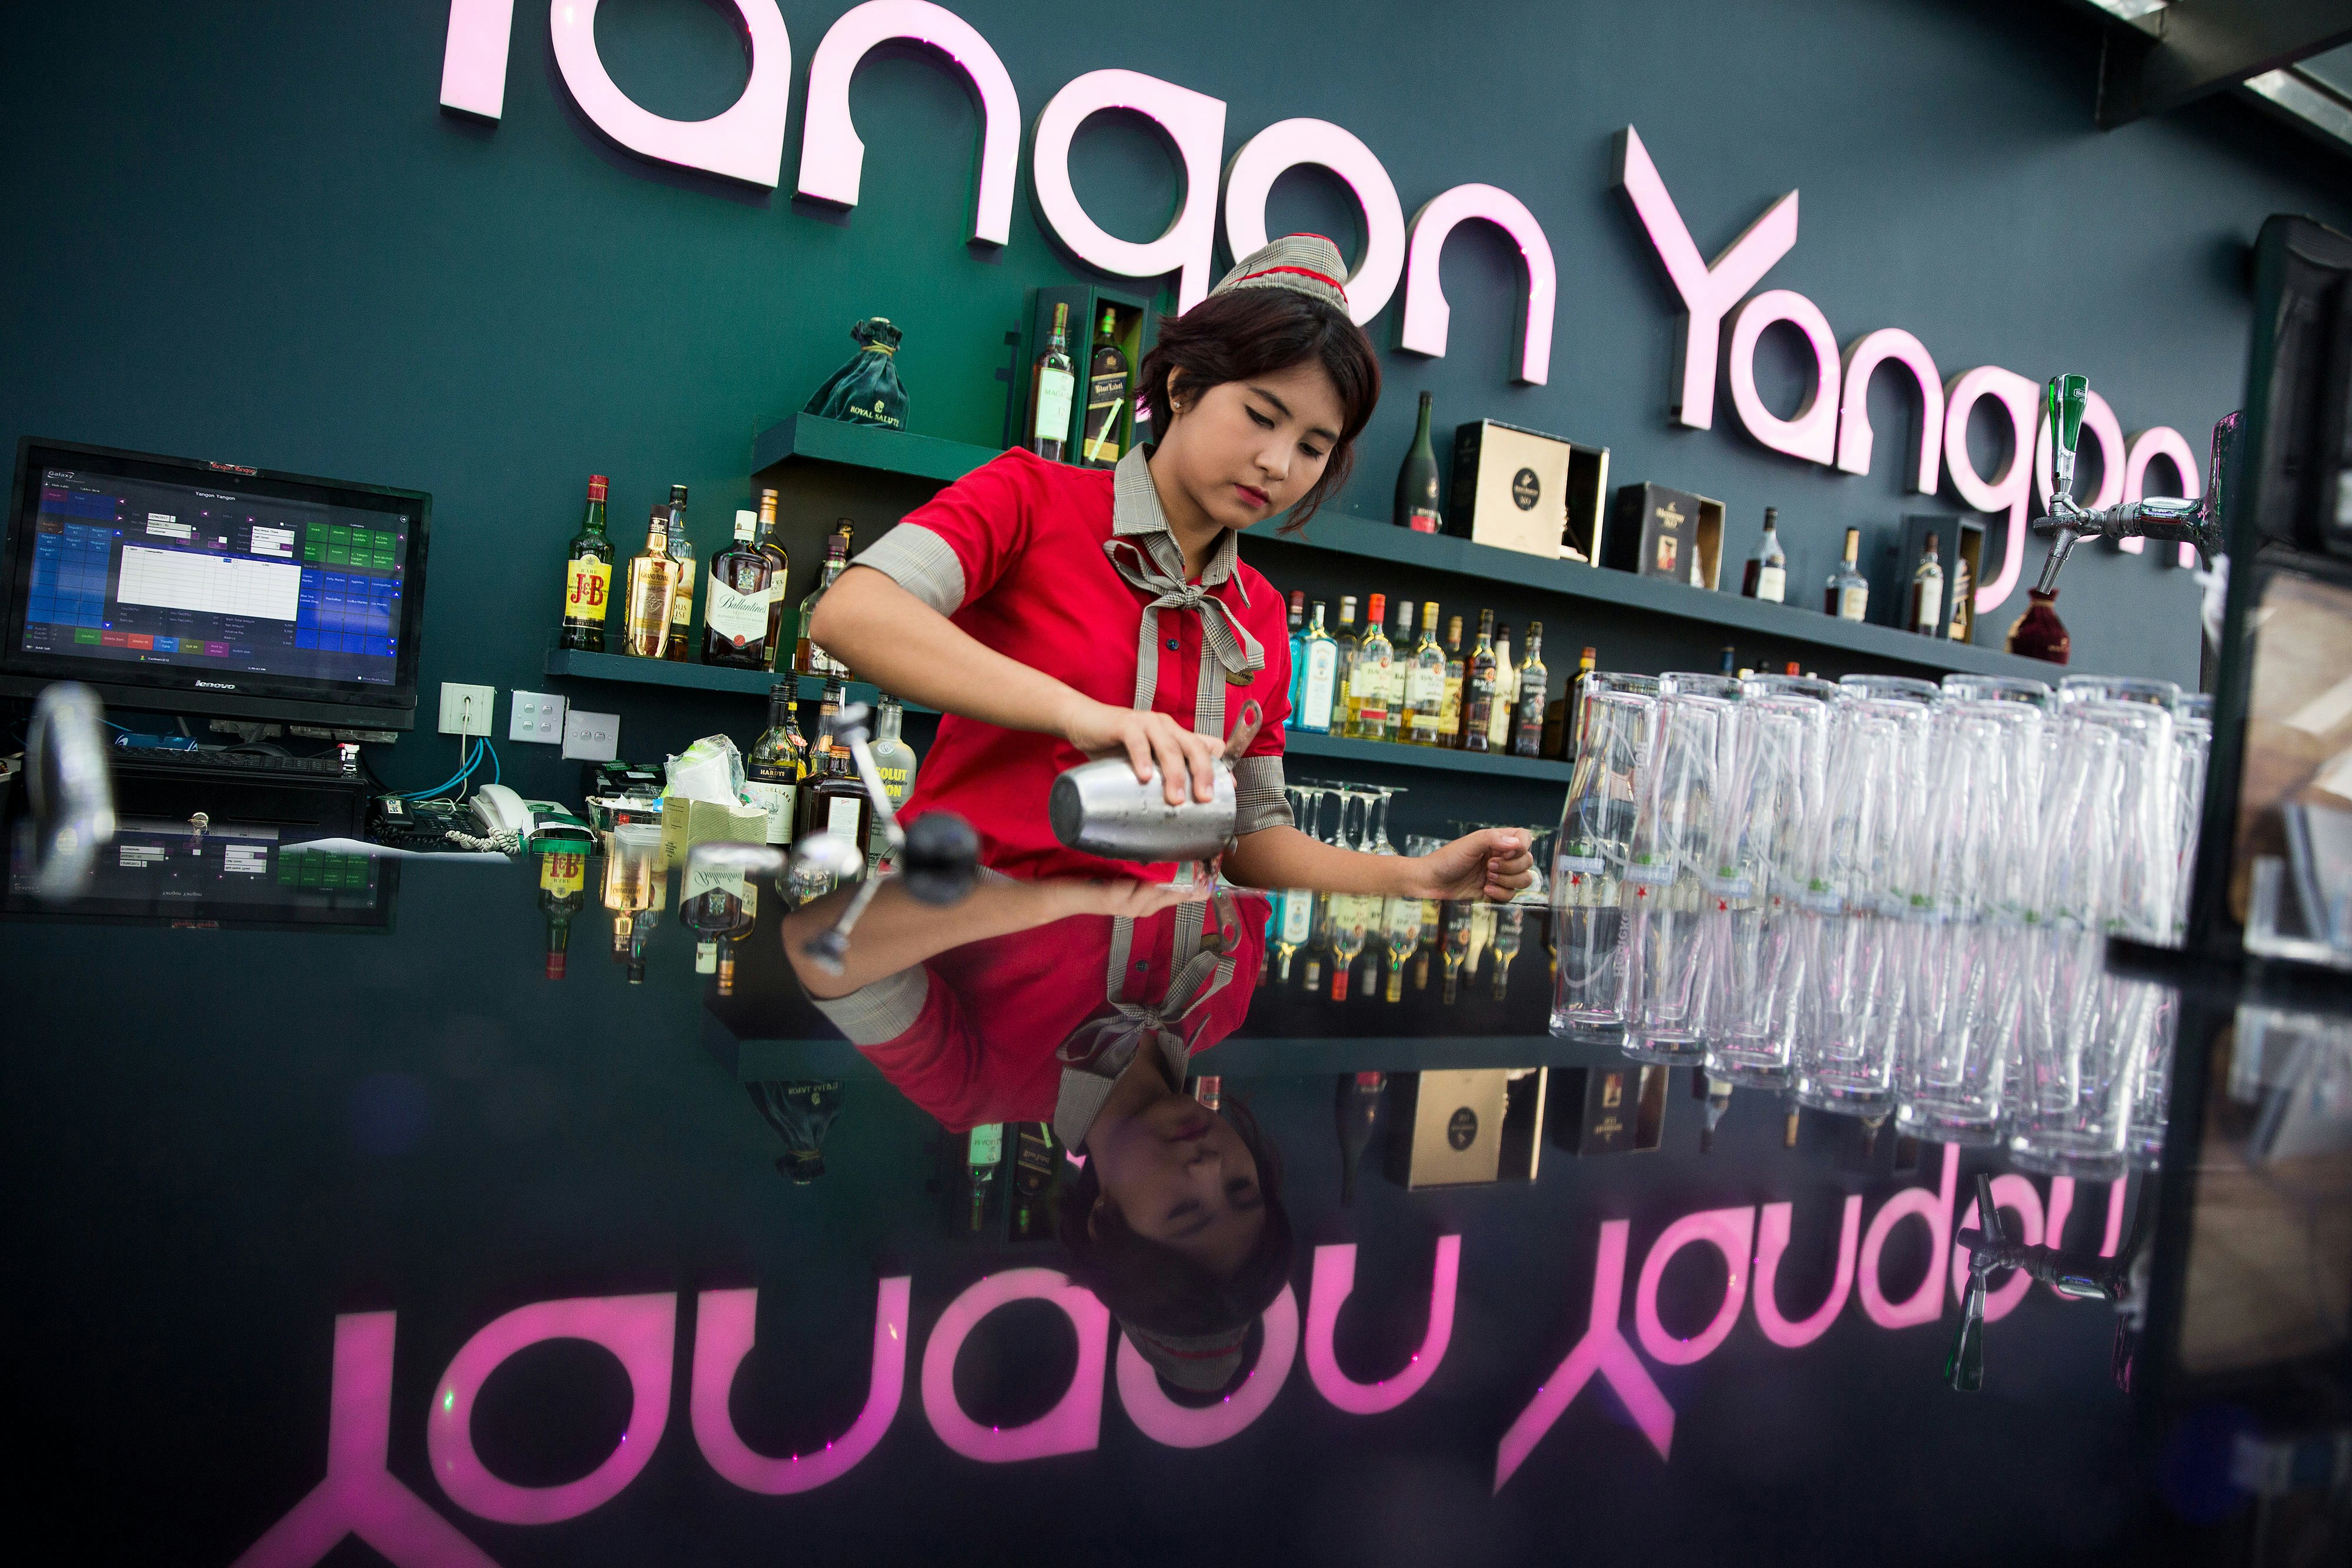 A bartender in uniform is preparing a cocktail in a fancy bar; a large sign on the wall behind her says 'Yangon Yangon'